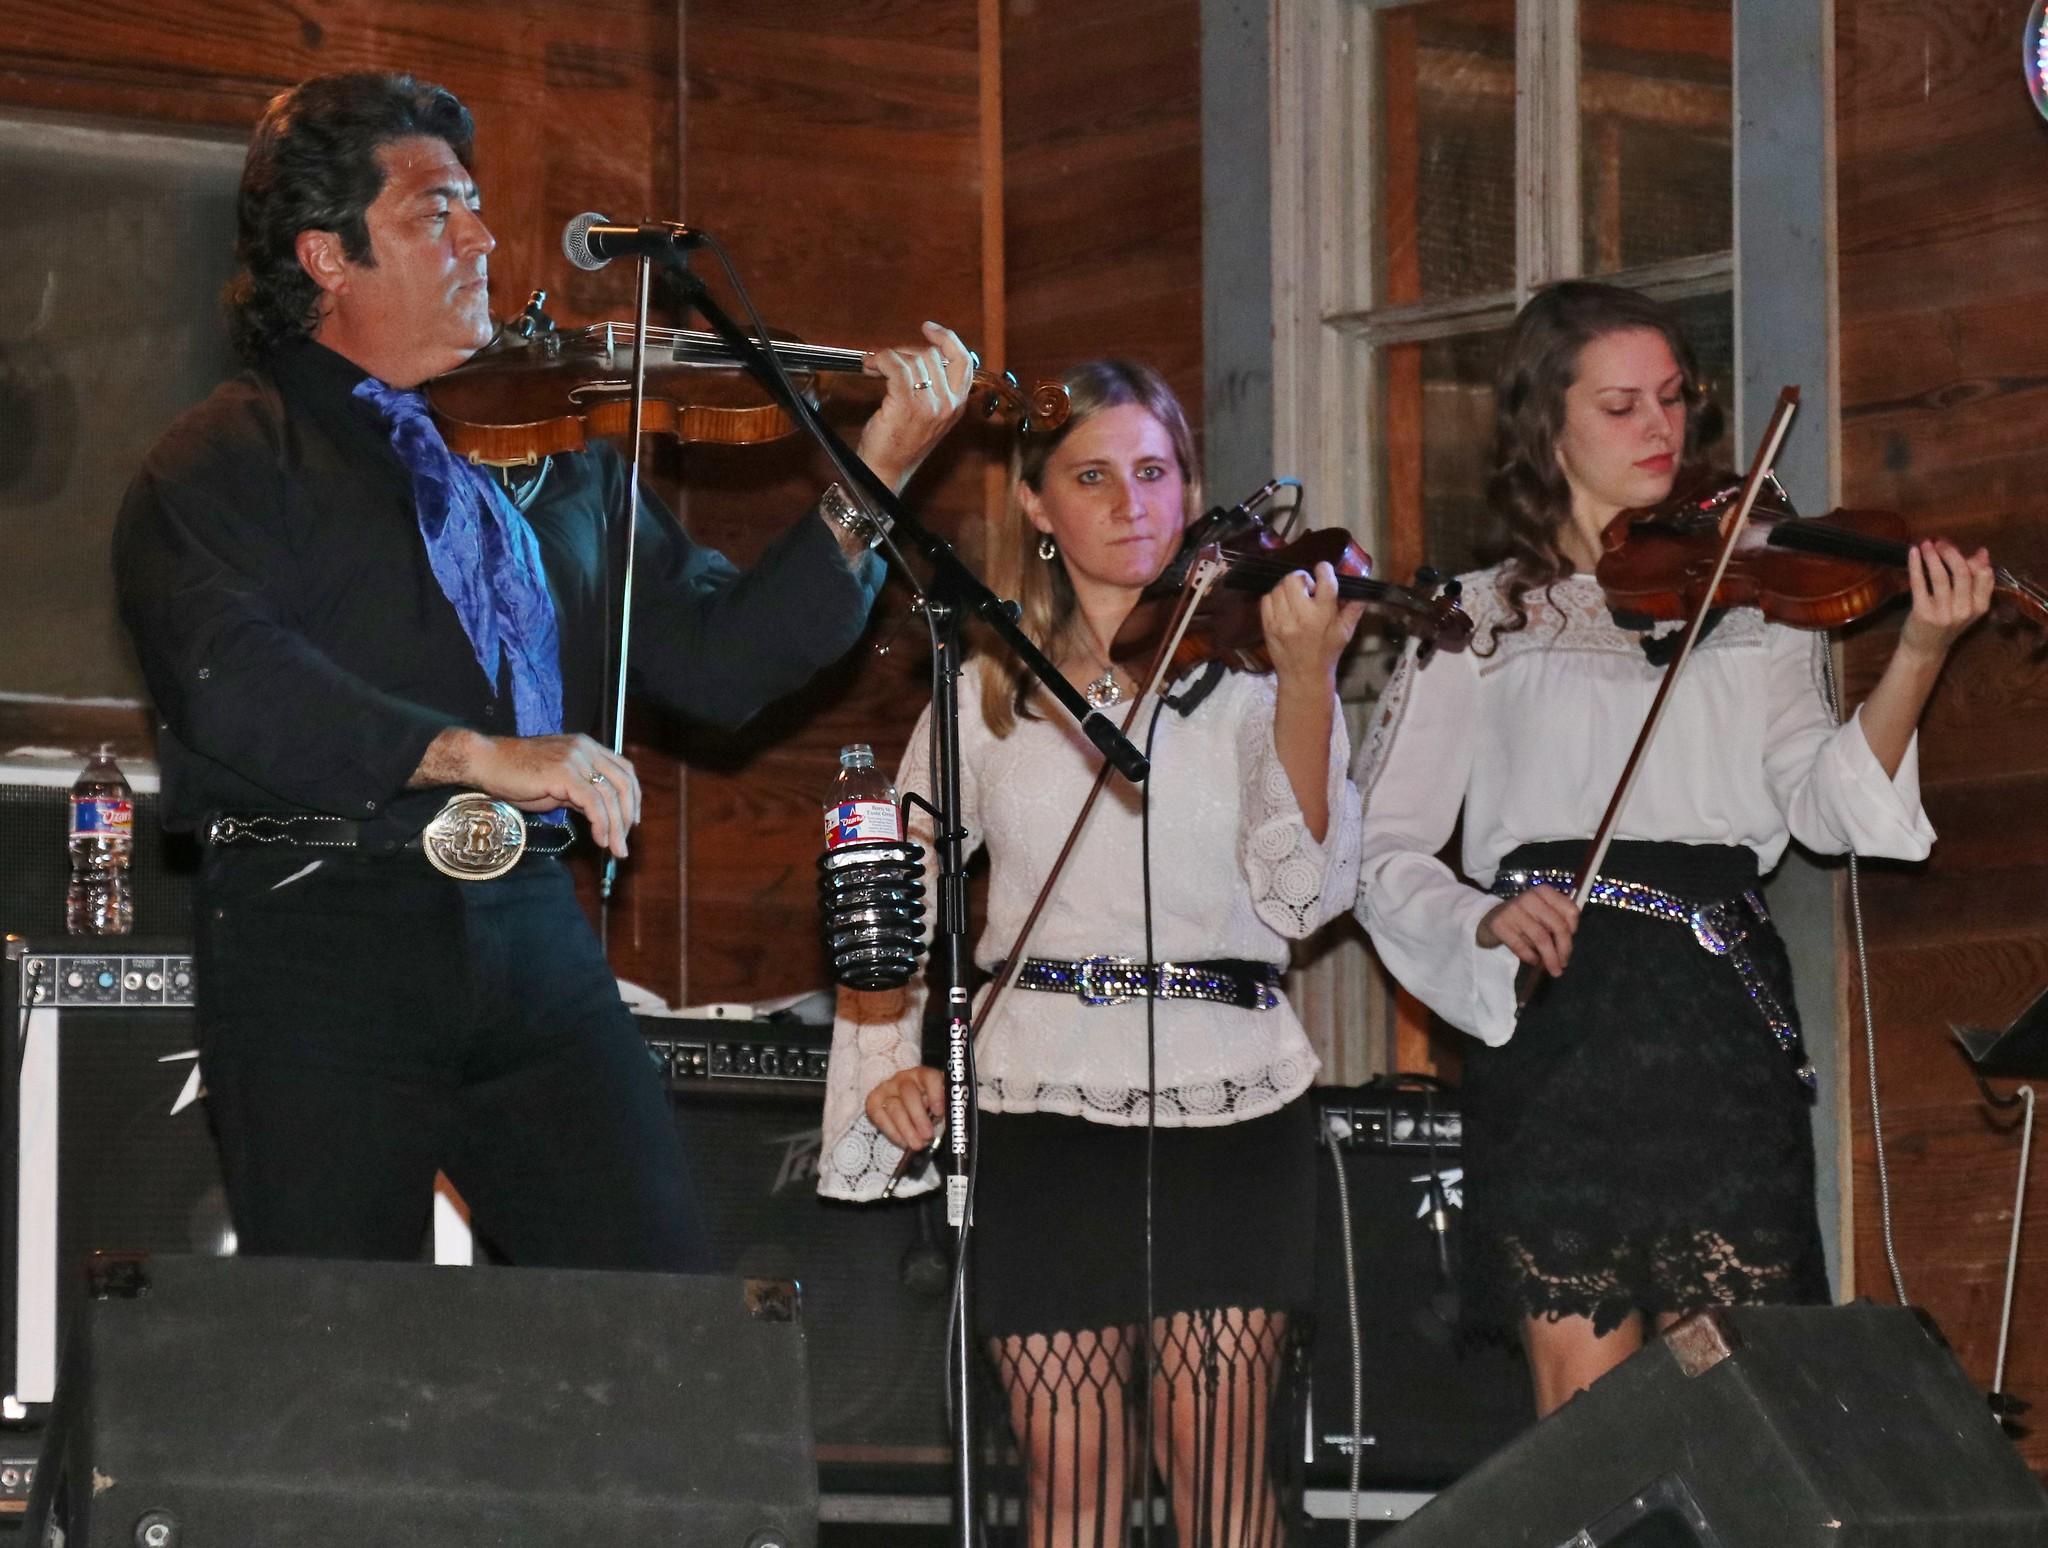 Bobby Flores and Yellow Rose Band will be at Festival of Texas Fiddling